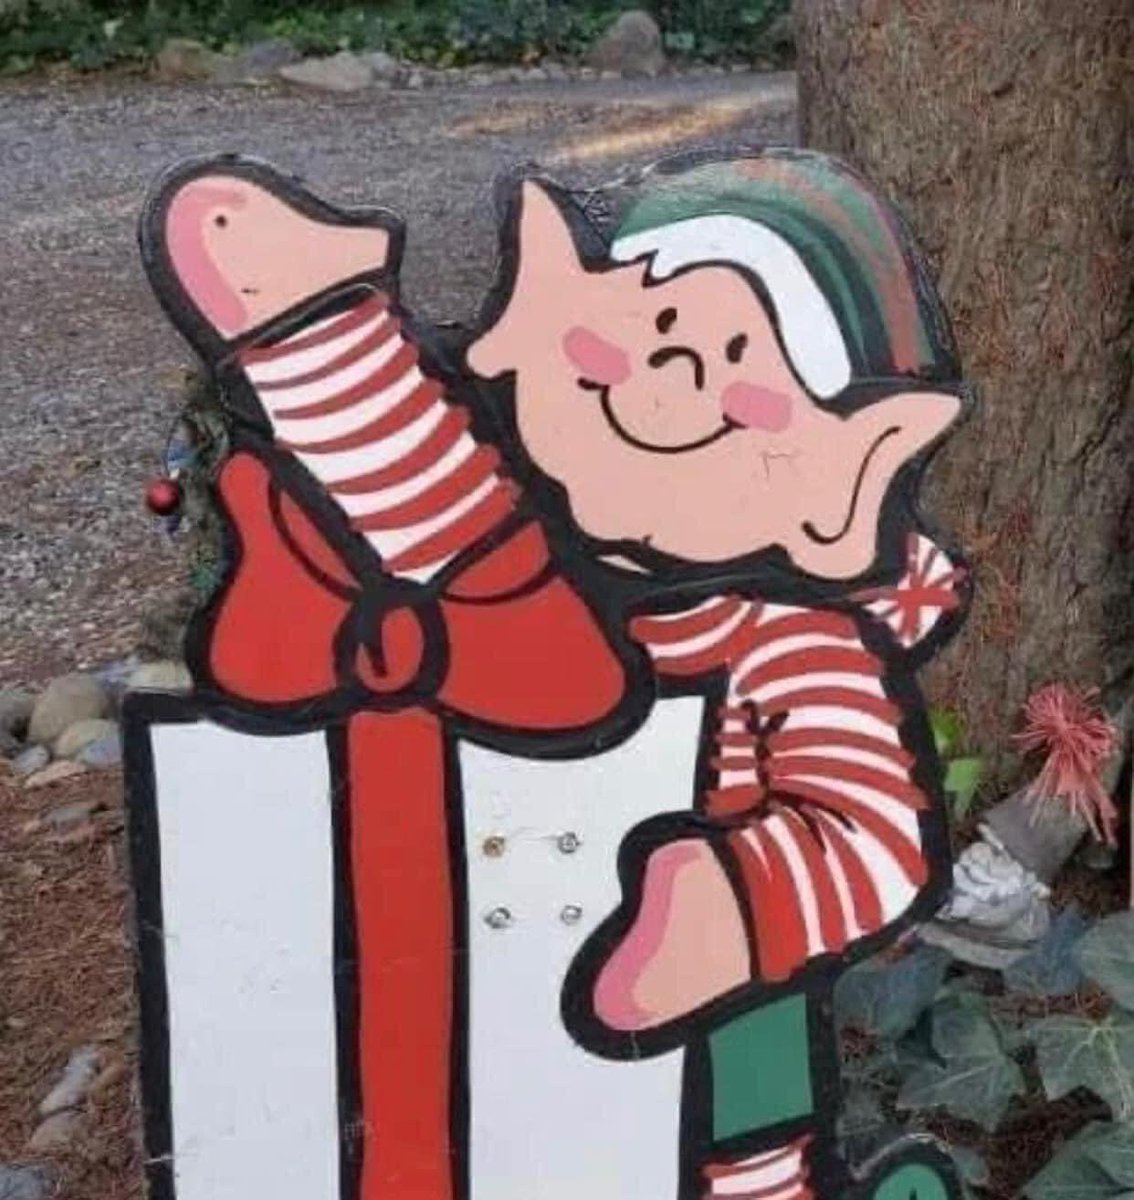 'When you realize the elf's handiwork is a bit too... 'hands-on' for family-friendly decor!'